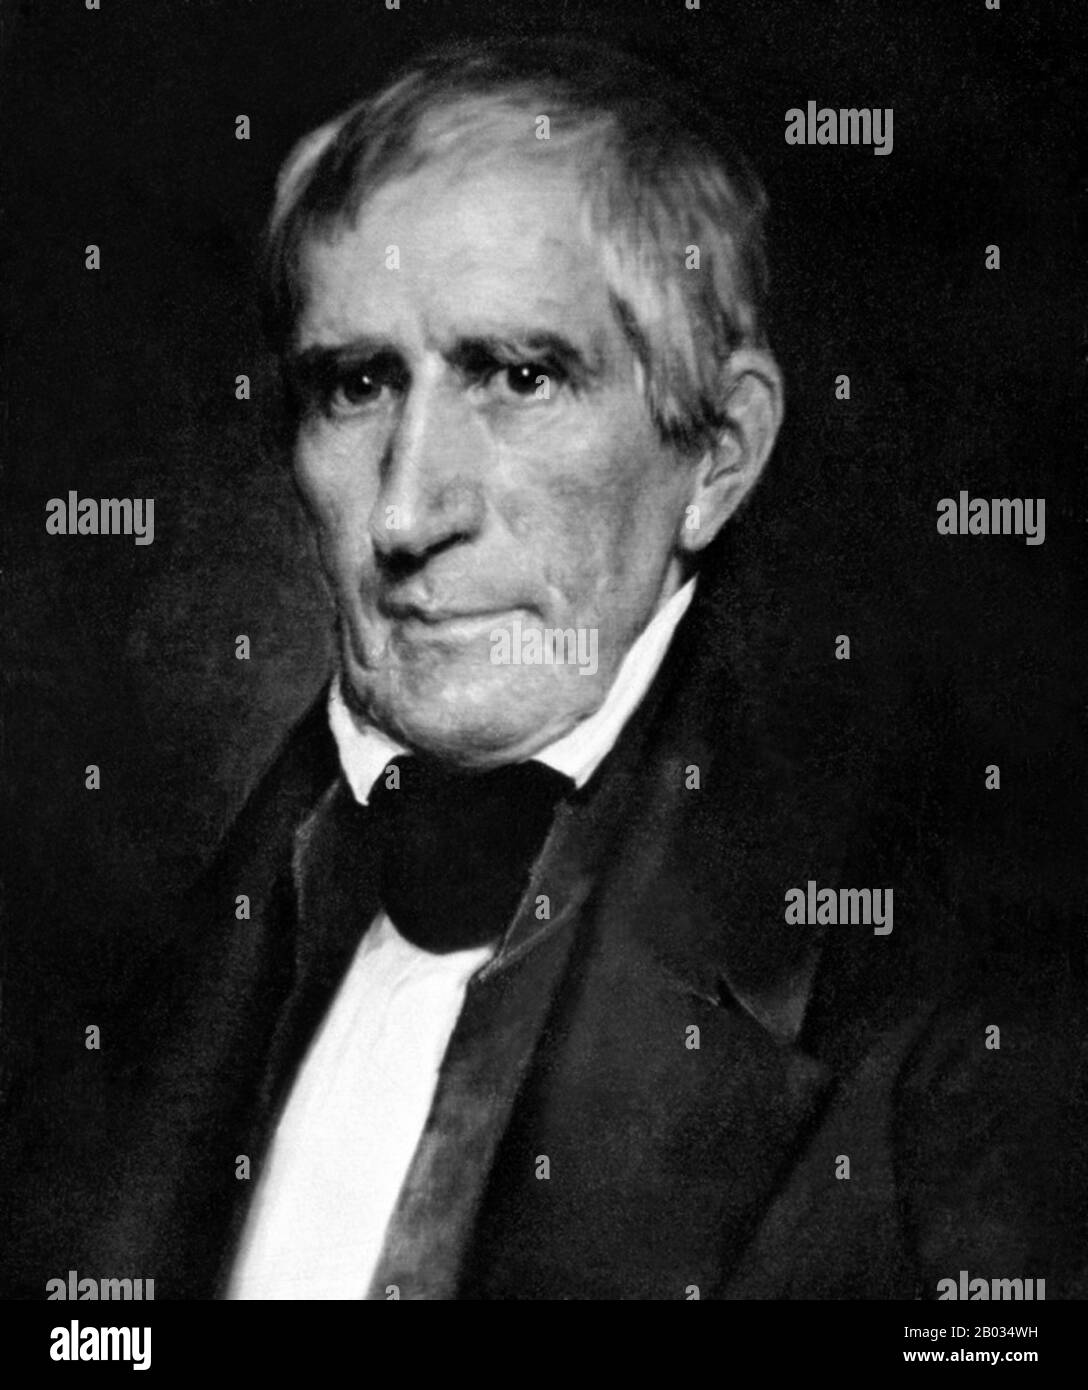 William Henry Harrison (February 9, 1773 – April 4, 1841) was the ninth President of the United States (1841), an American military officer and politician, and the last president born as a British subject. He was also the first president to die in office.  He was 68 years, 23 days old when inaugurated, the oldest president to take office until Ronald Reagan in 1981. Harrison died on his 32nd day in office of complications from pneumonia, serving the shortest tenure in United States presidential history. Stock Photo